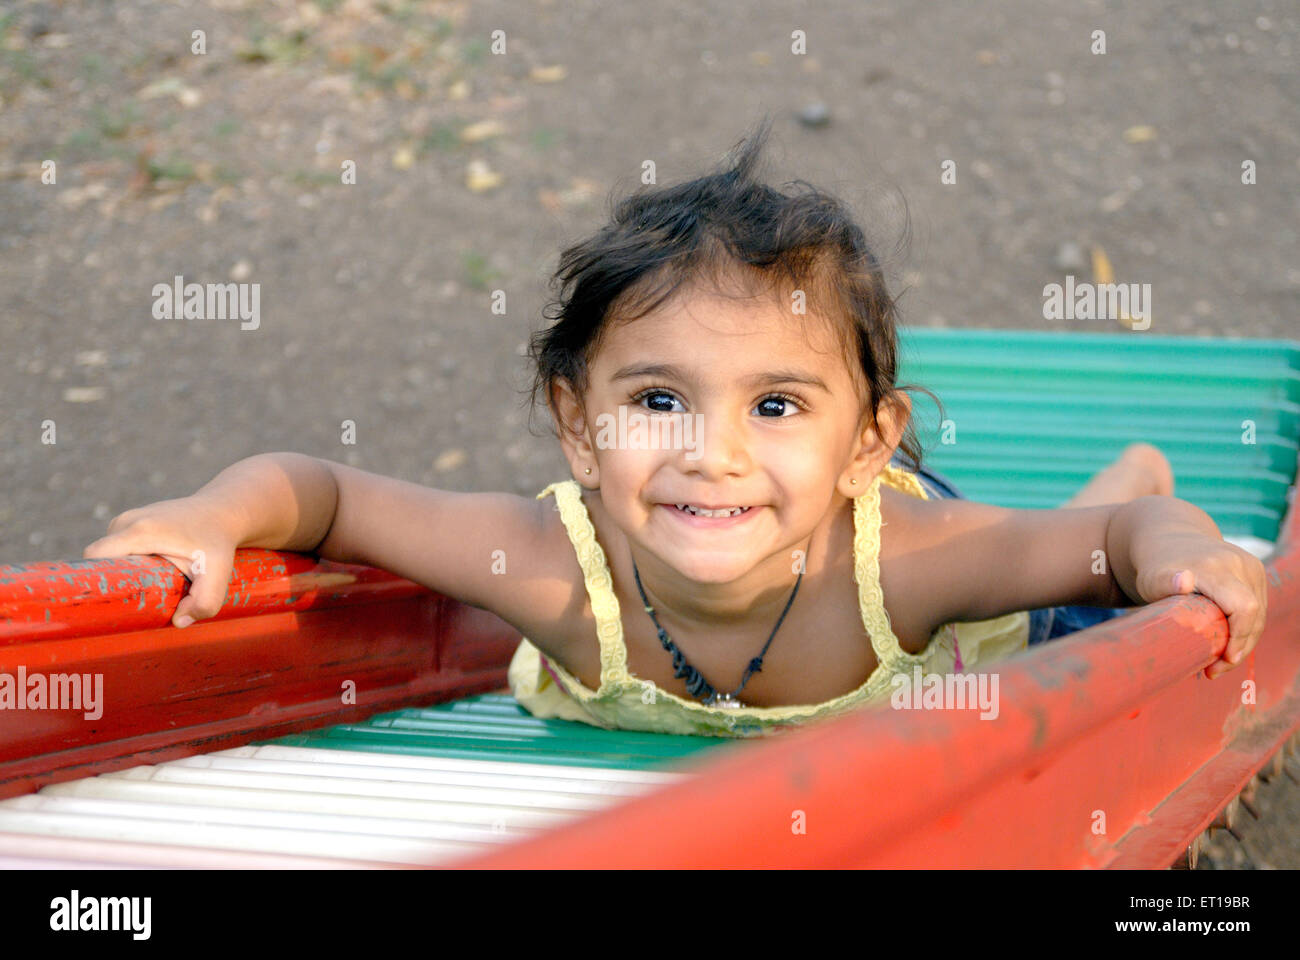 Indian young girl child sliding stomach - MR#736L Stock Photo